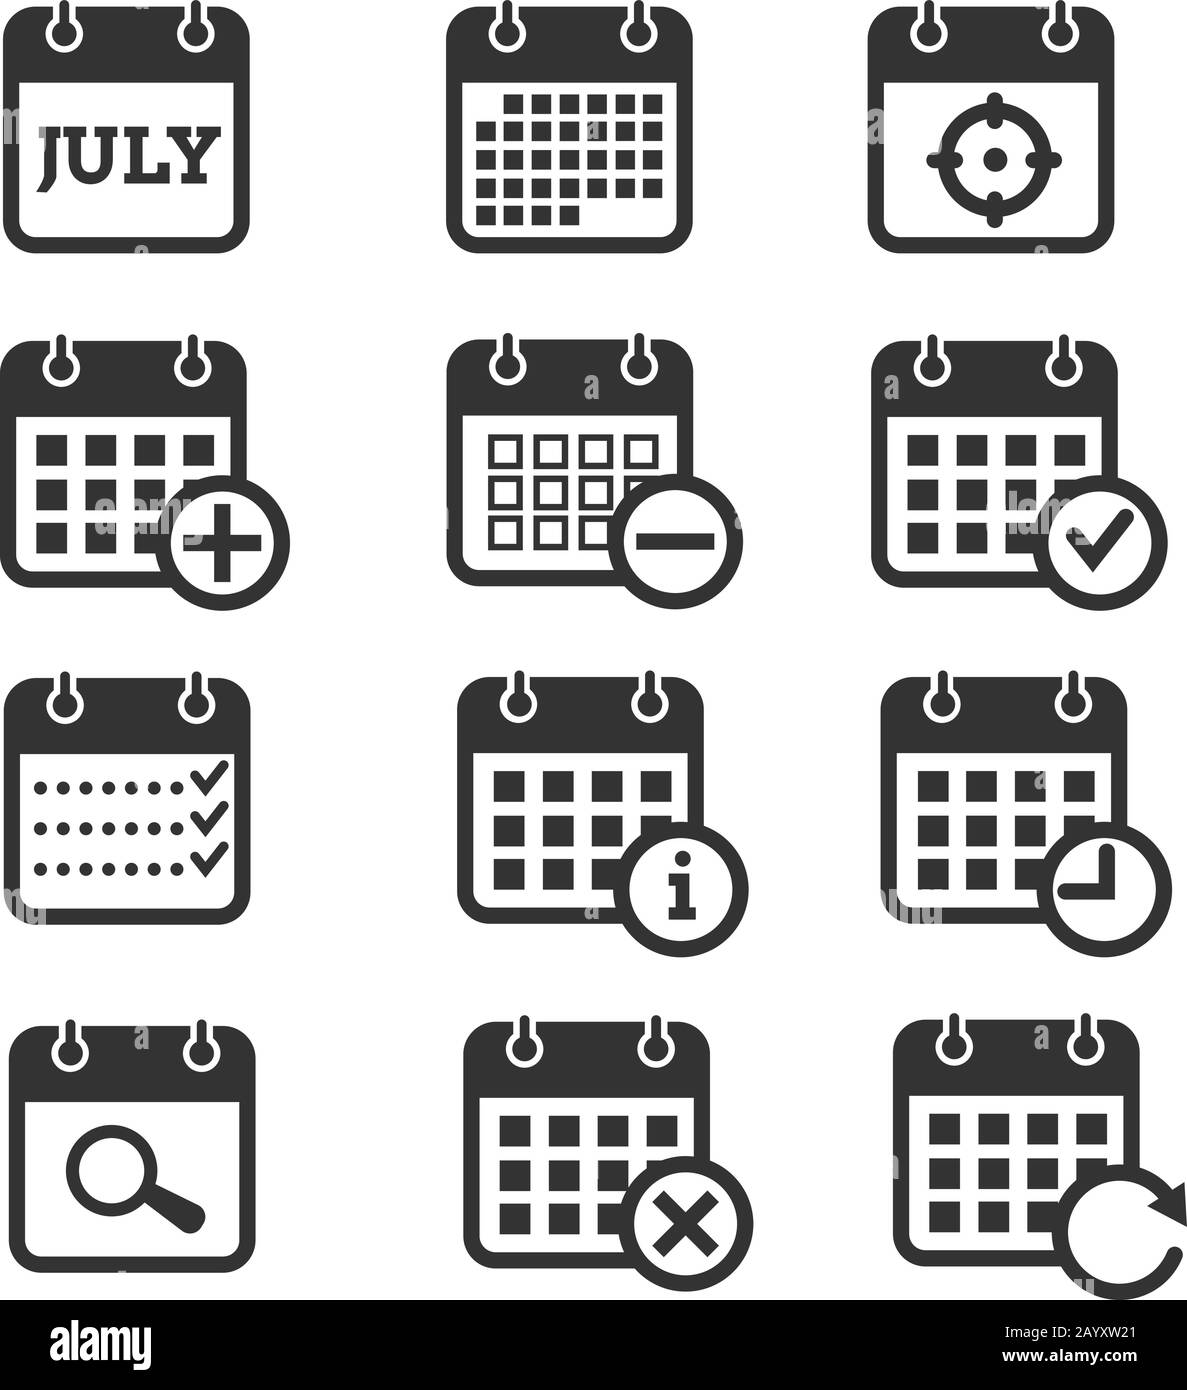 Time, date and calendar vector icons. Calendar icons for organizer and event, reminder and agenda Stock Vector